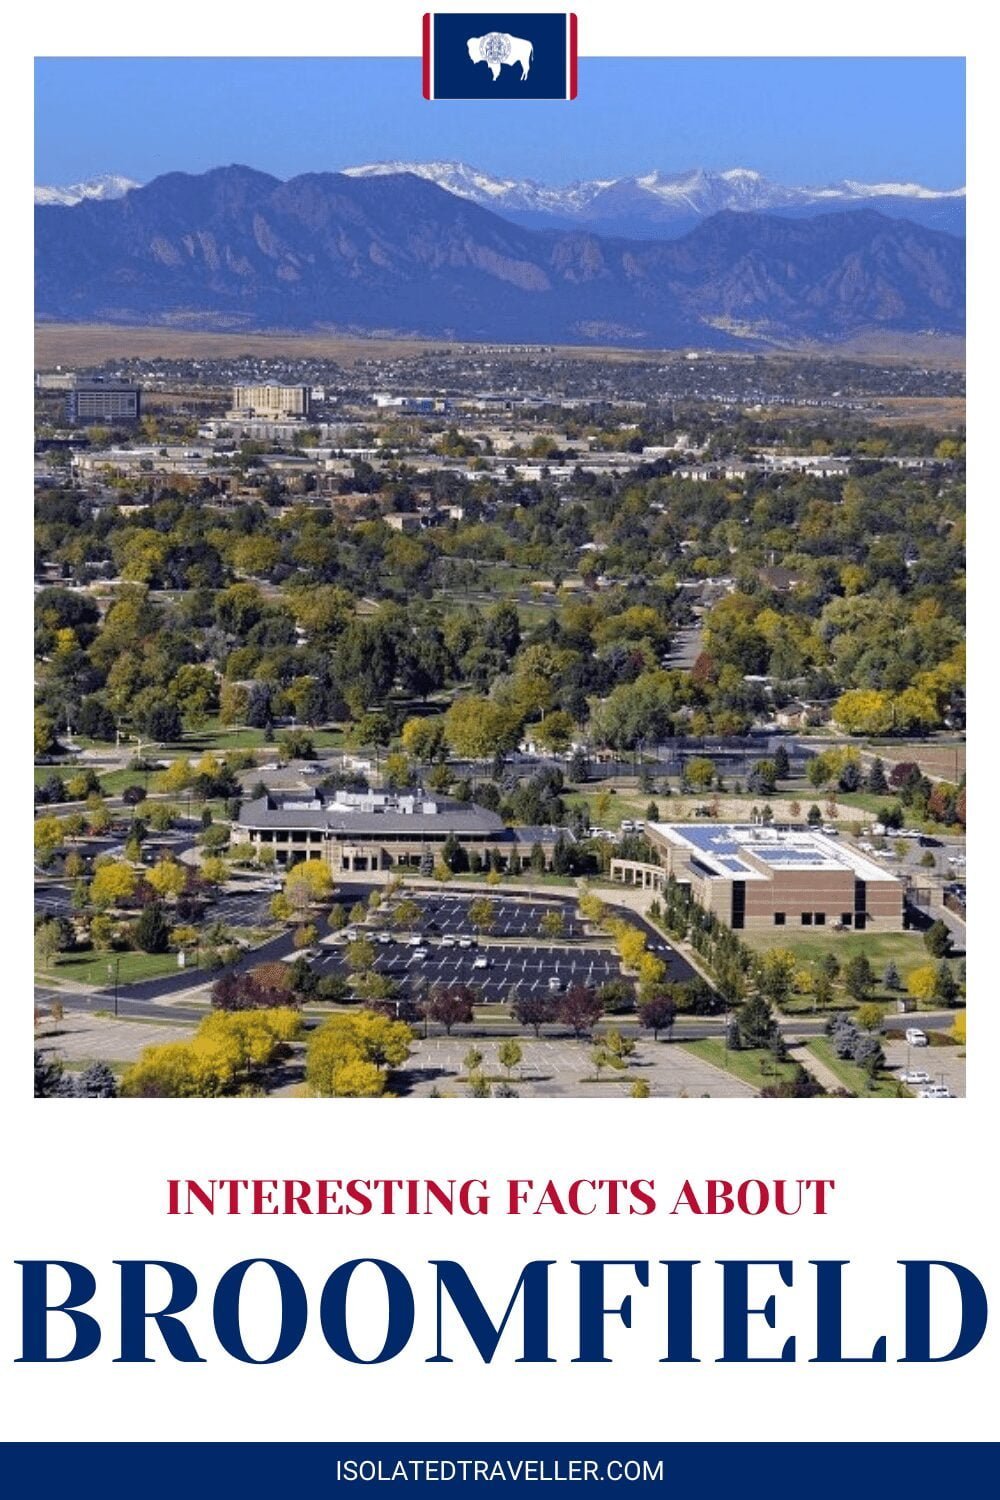 Facts About Broomfield, Colorado